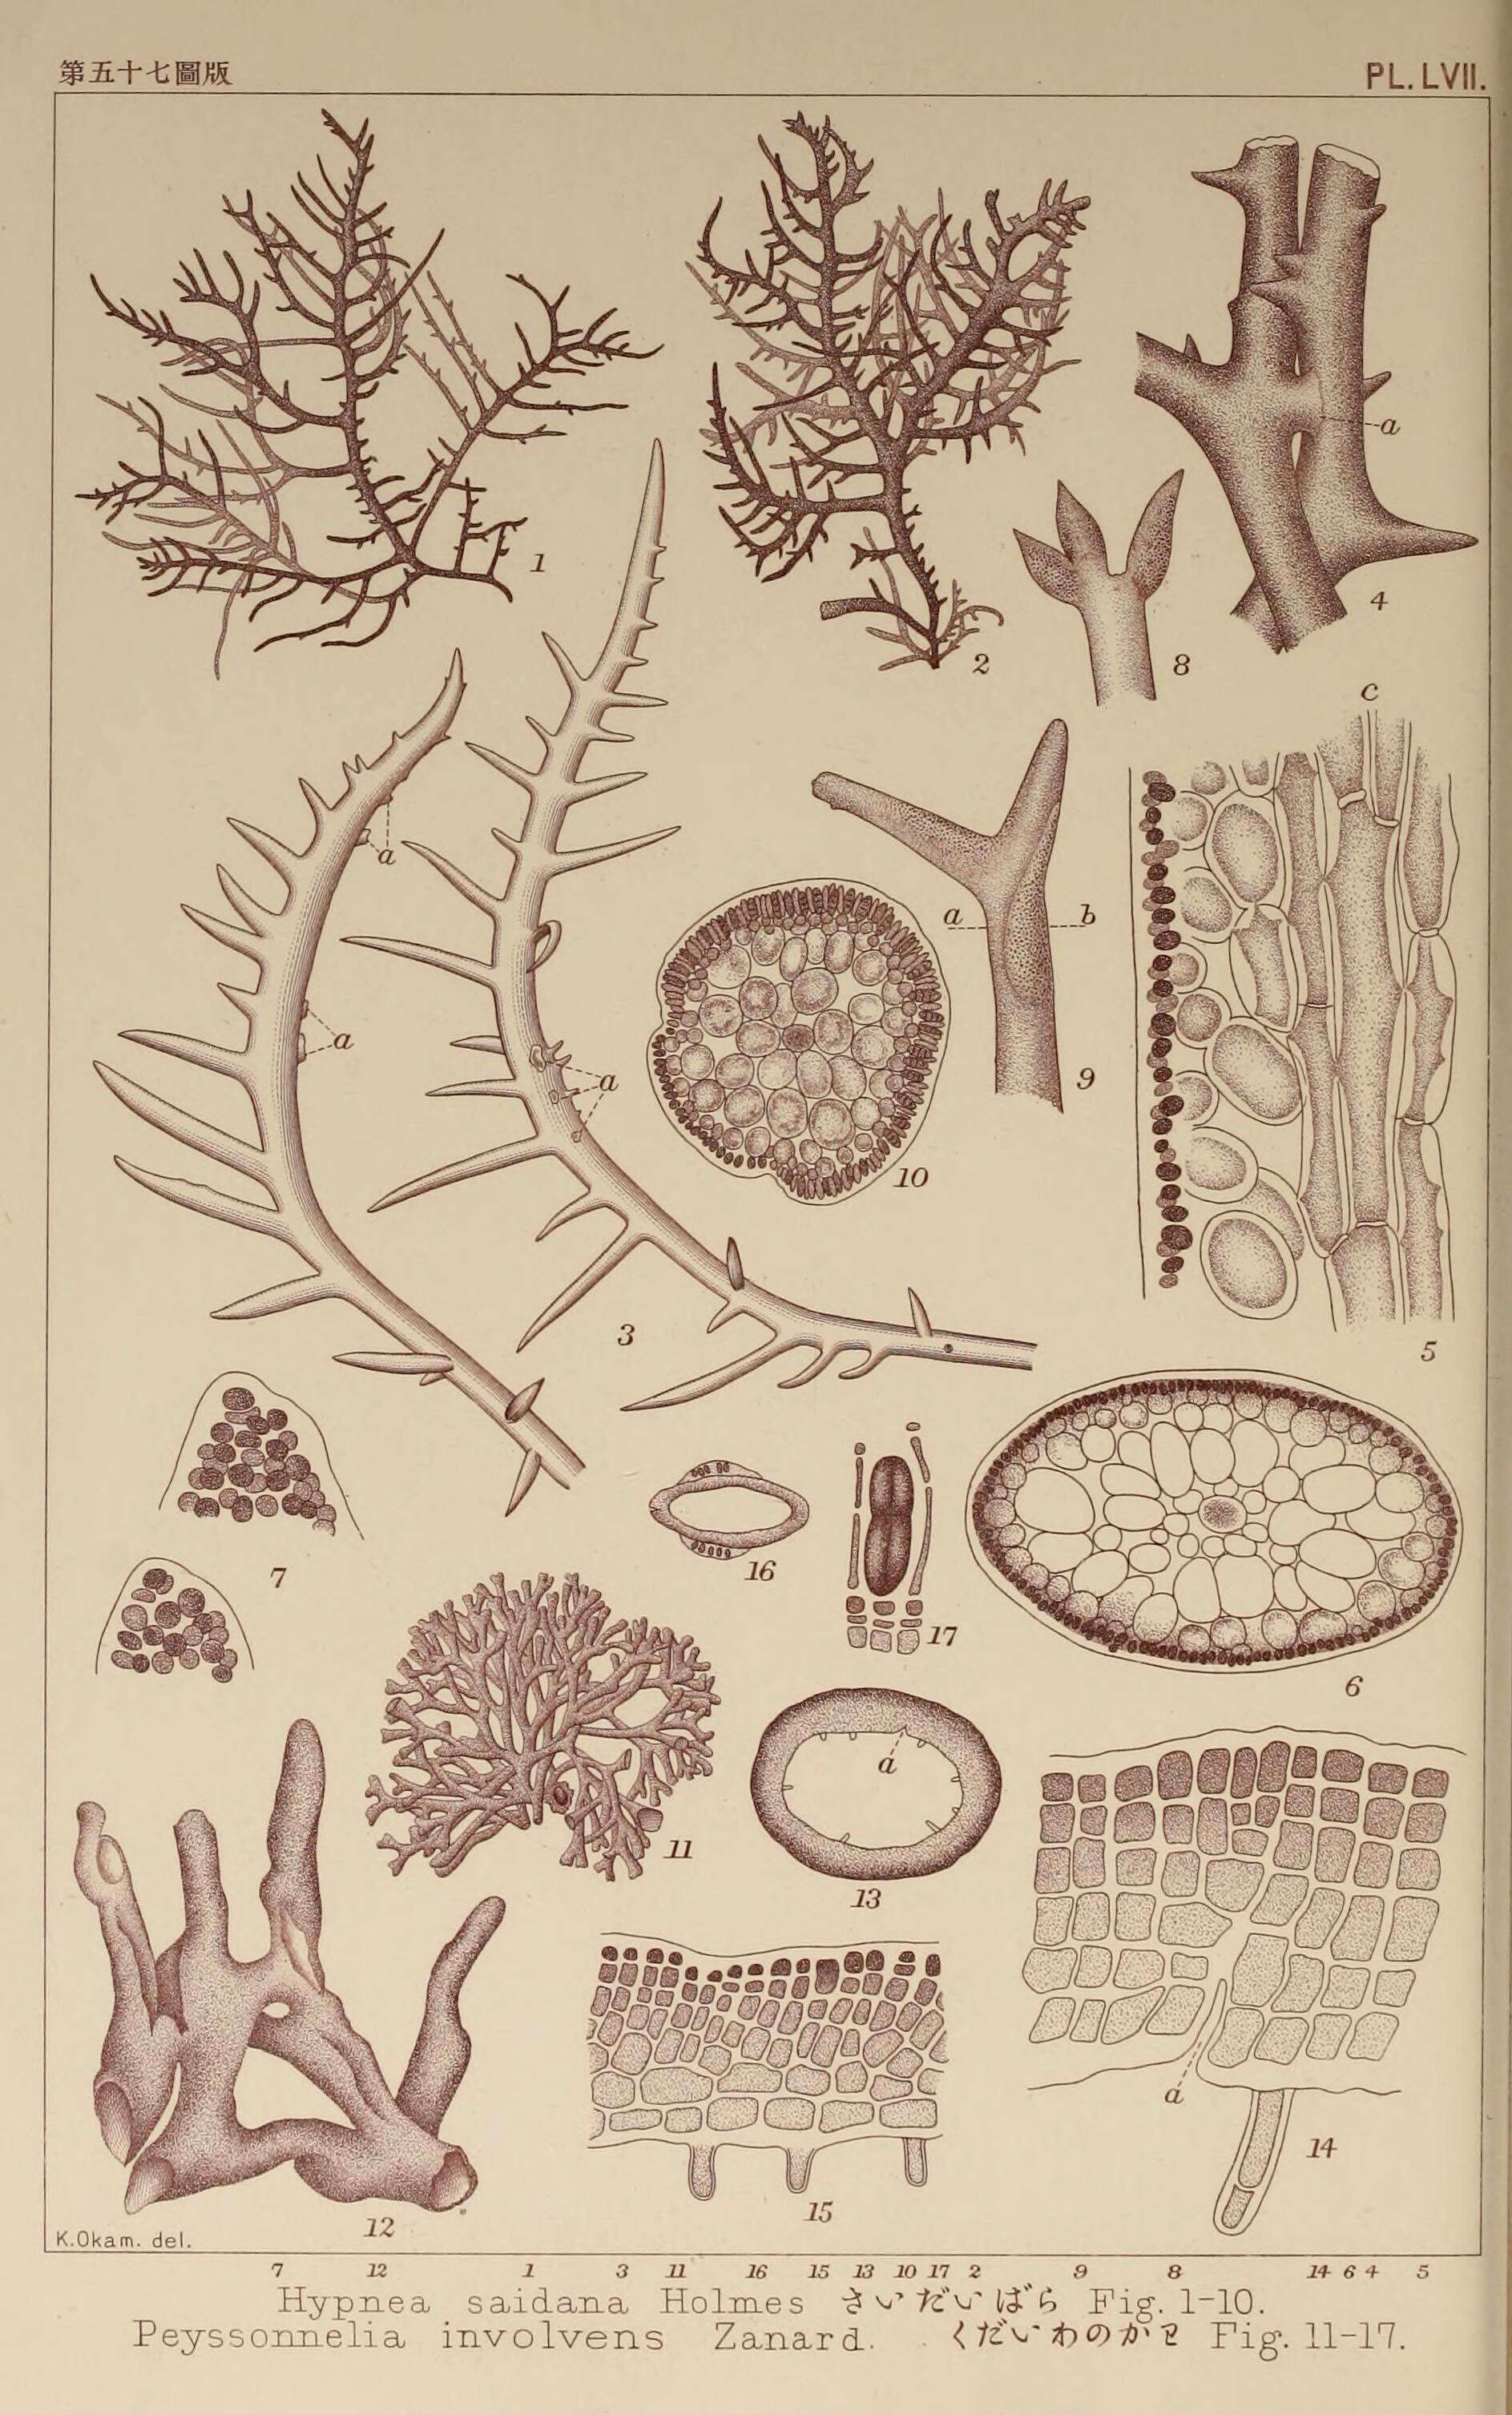 Image of Cystocloniaceae